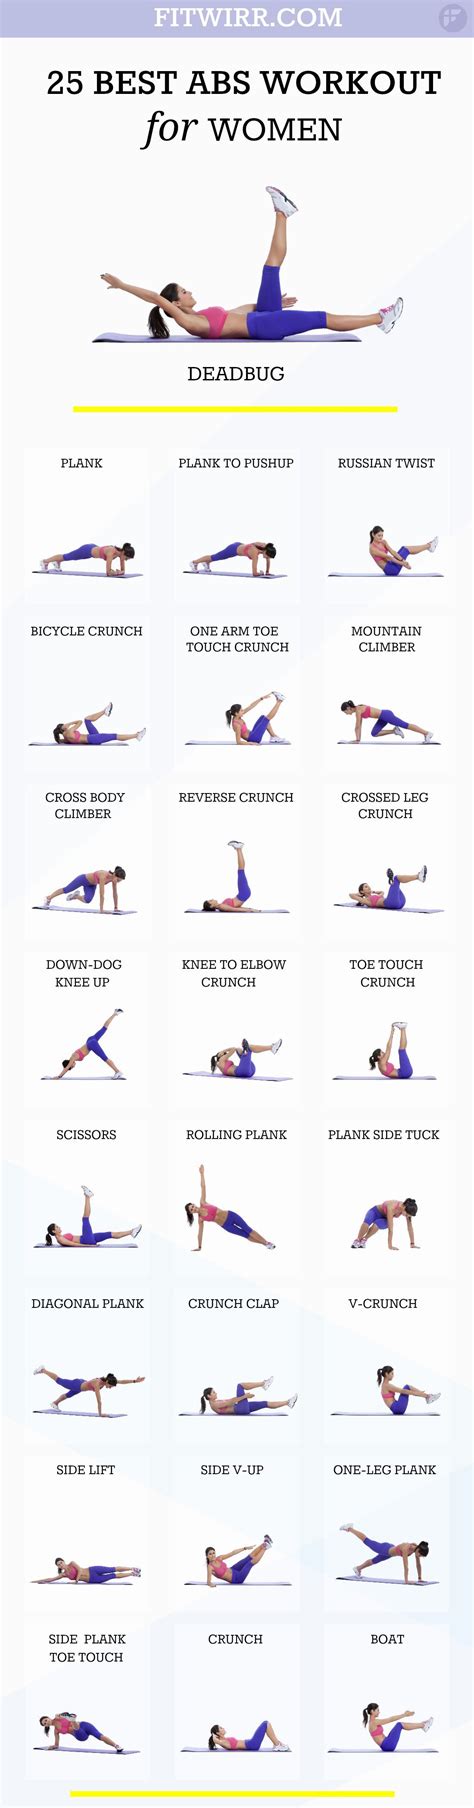 Ab Exercises 25 Best Ab Workouts For Women Fitwirr Abs Workout